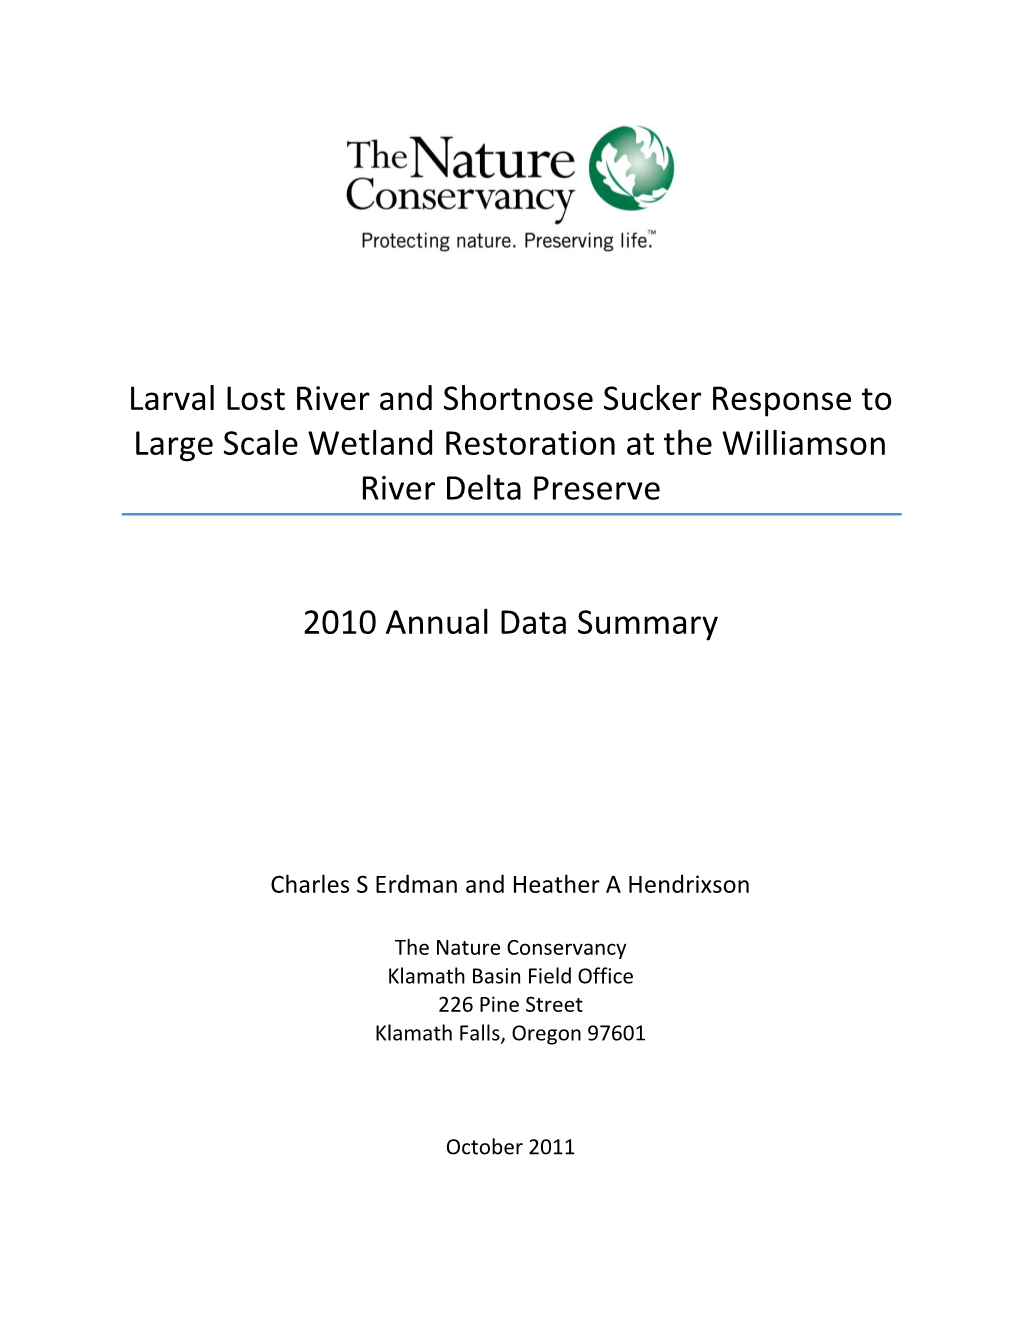 Larval Lost River and Shortnose Sucker Response to Large Scale Wetland Restoration at the Williamson River Delta Preserve